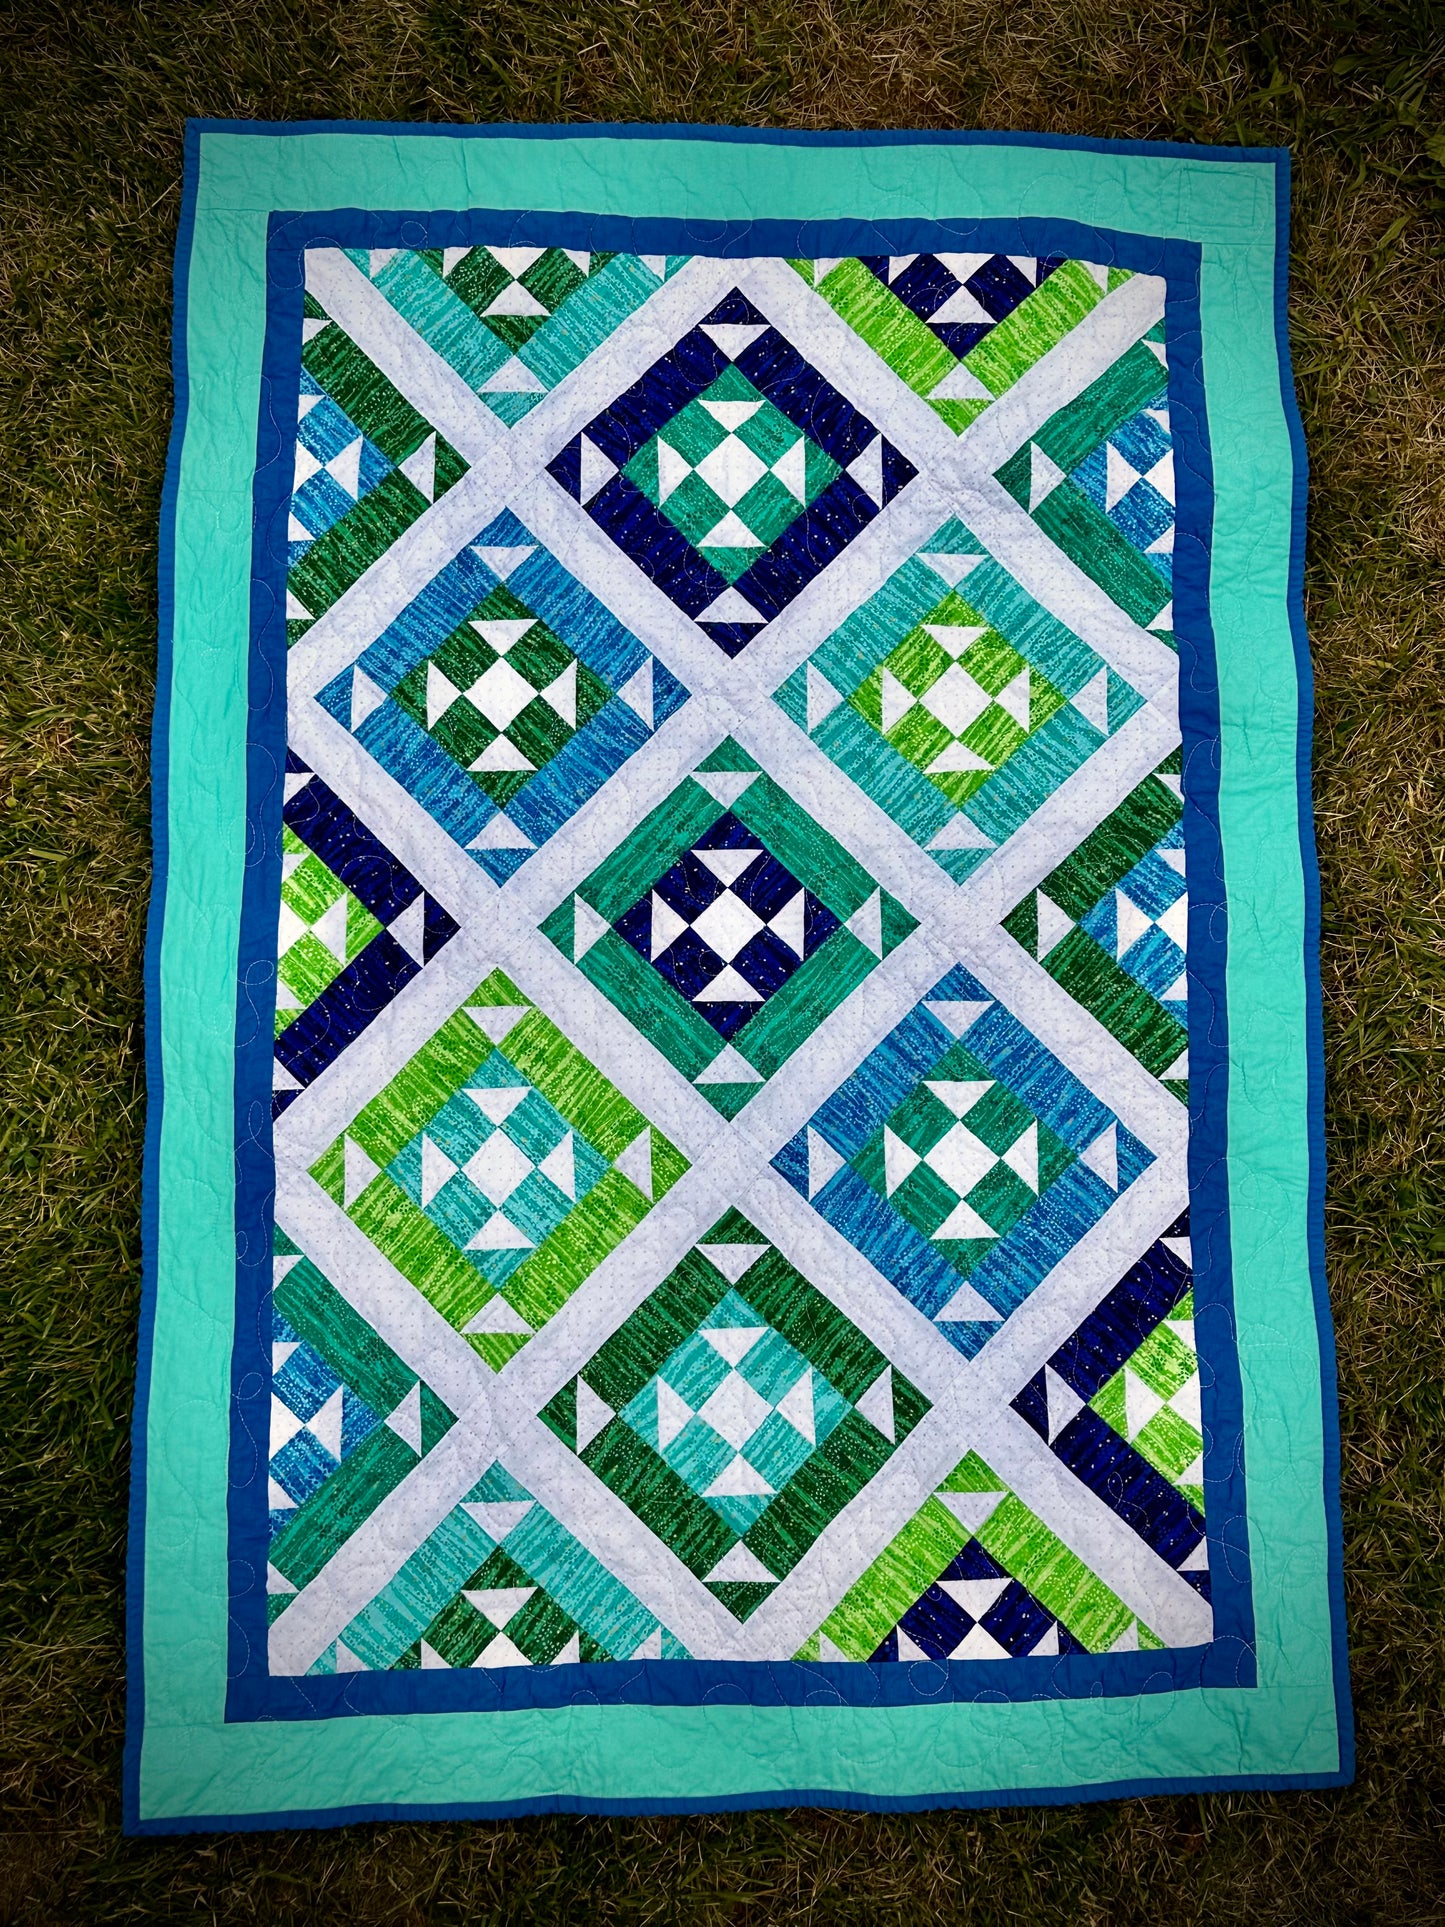 Carry Me Home Quilt - PDF Download